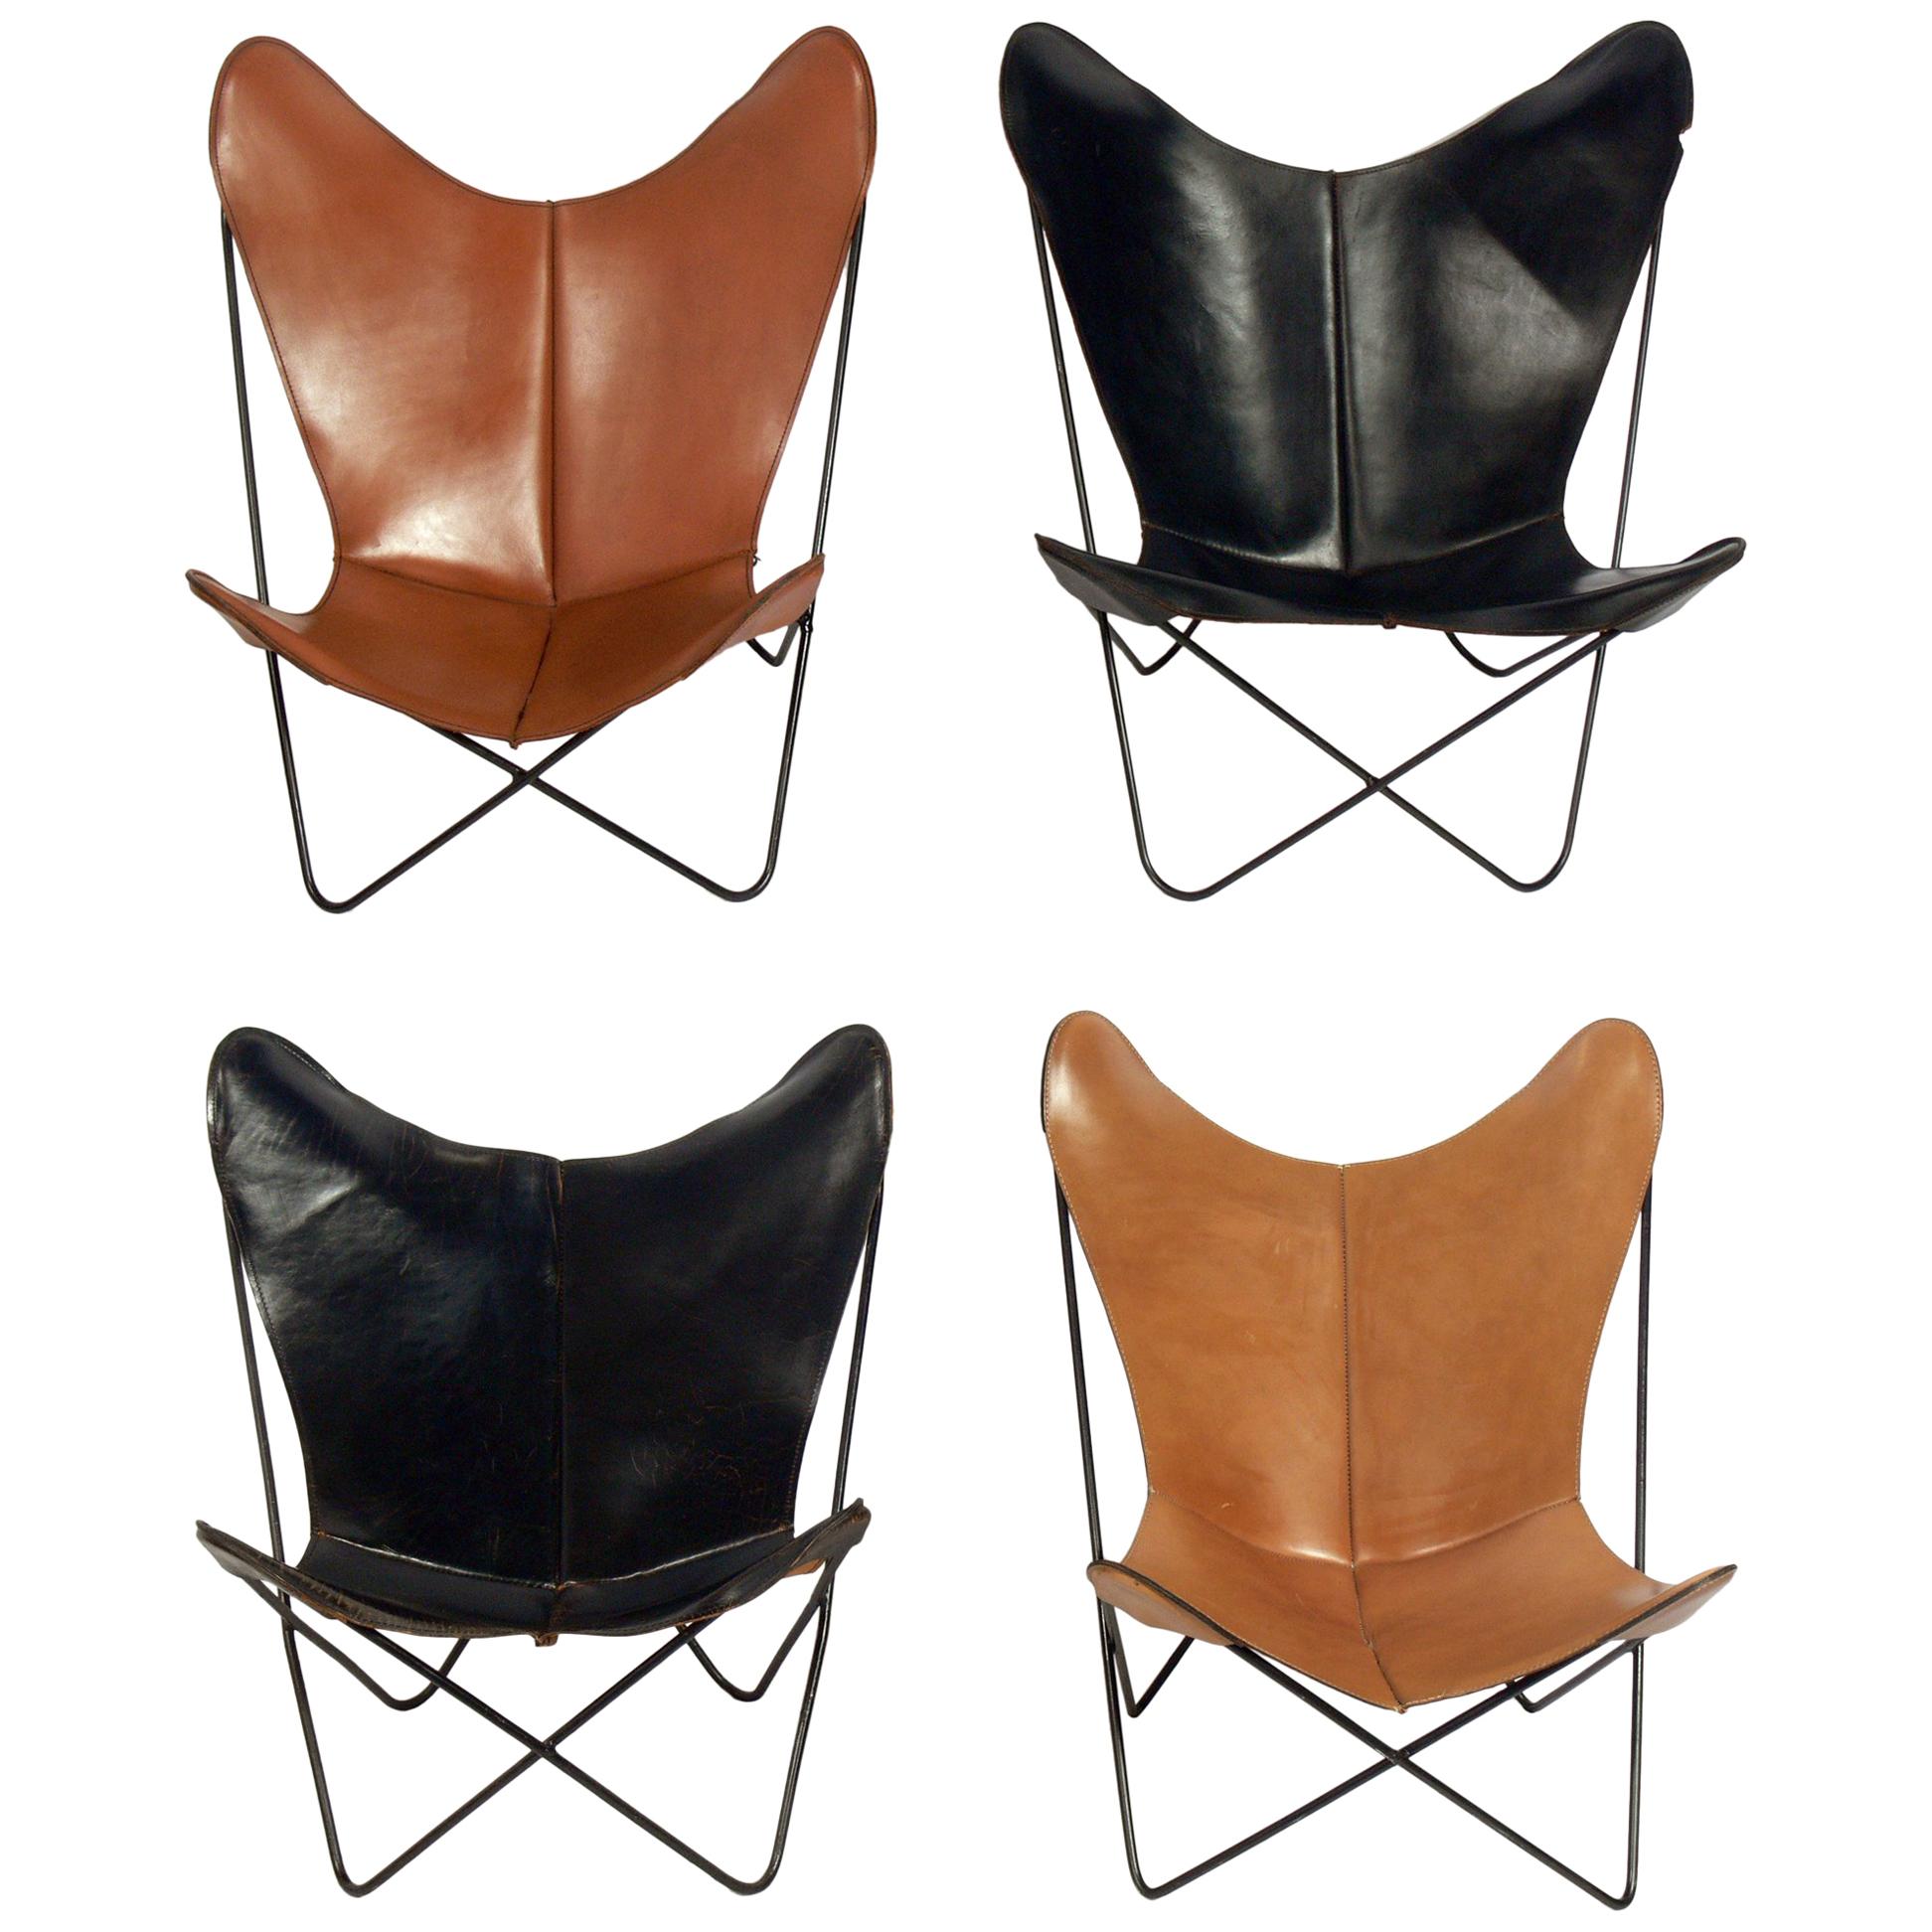 Selection of vintage leather butterfly chairs, circa 1950s. These appear to be the examples designed by Jorge Ferrari-Hardoy for Knoll, unsigned. Top left measures 35